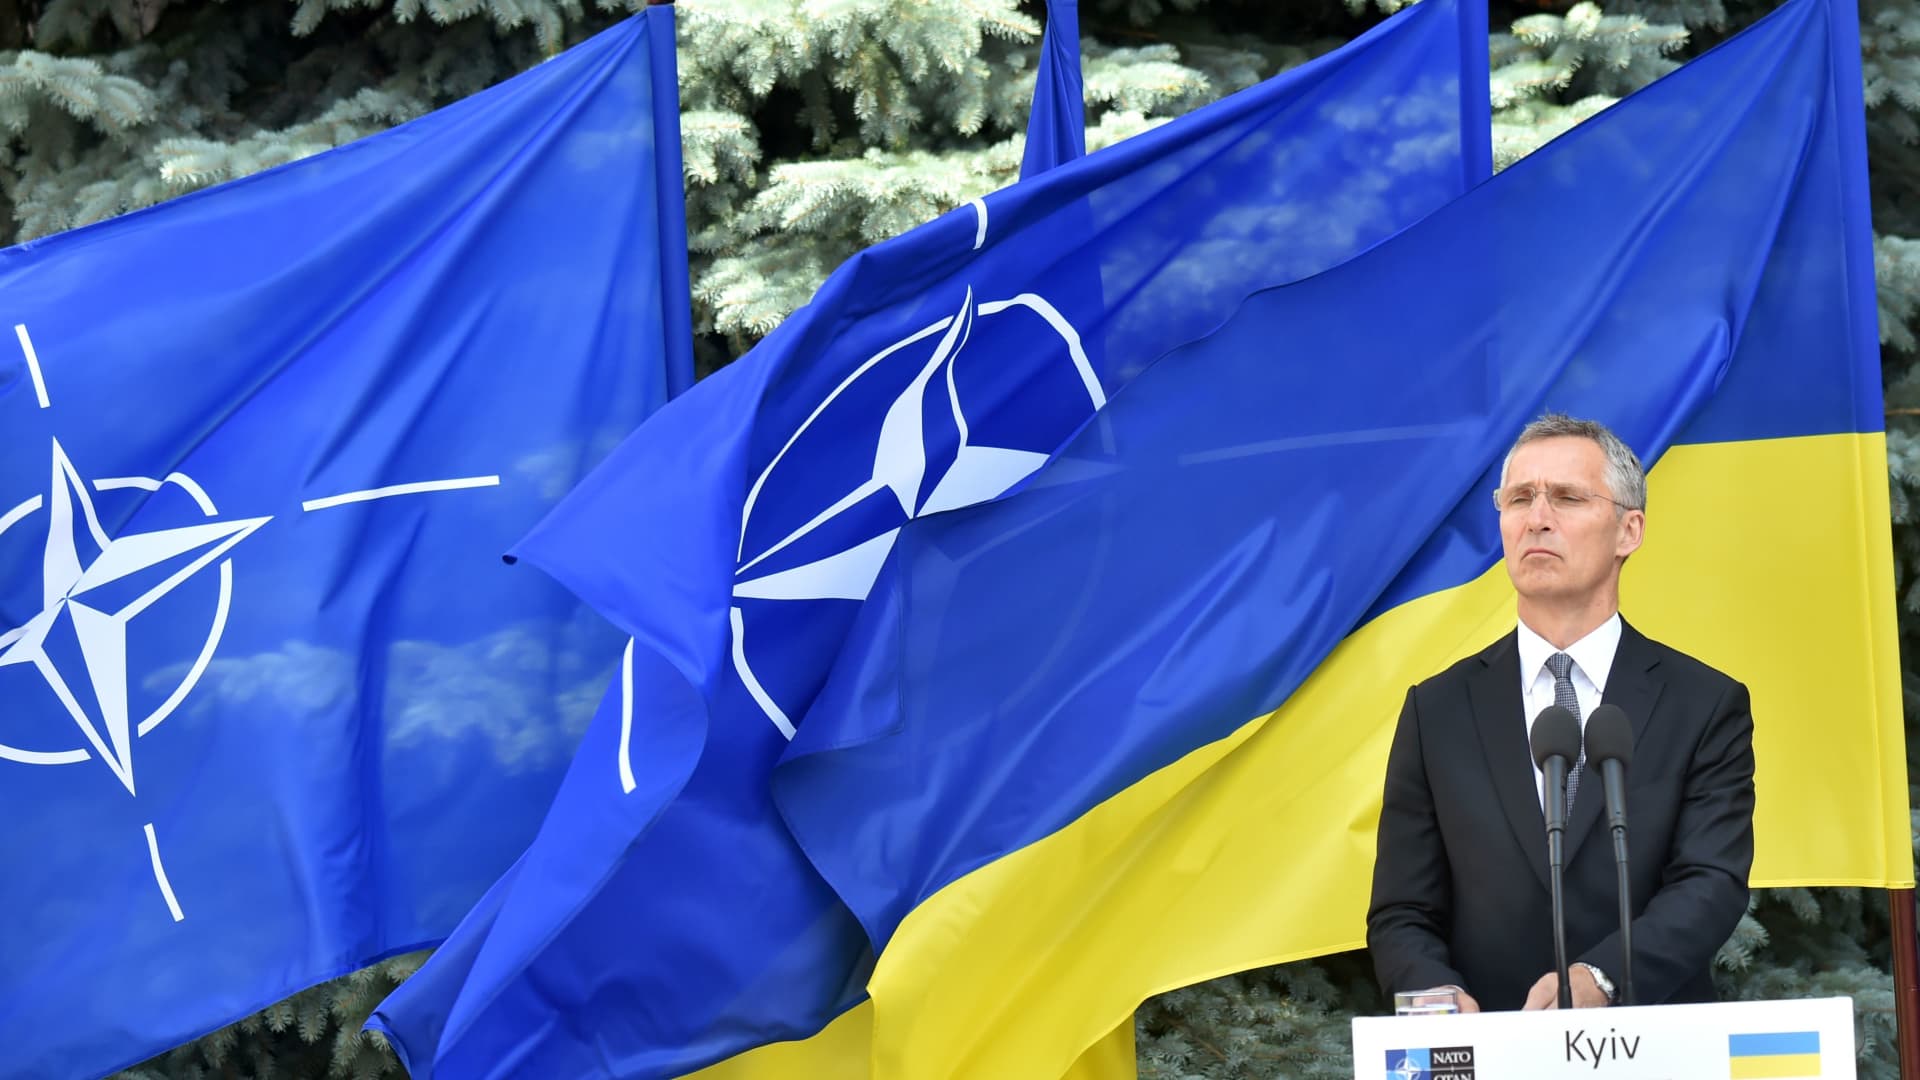 NATO Secretary General Jens Stoltenberg stands during a press conference with Ukrainian President in Kiev on July 10, 2017.